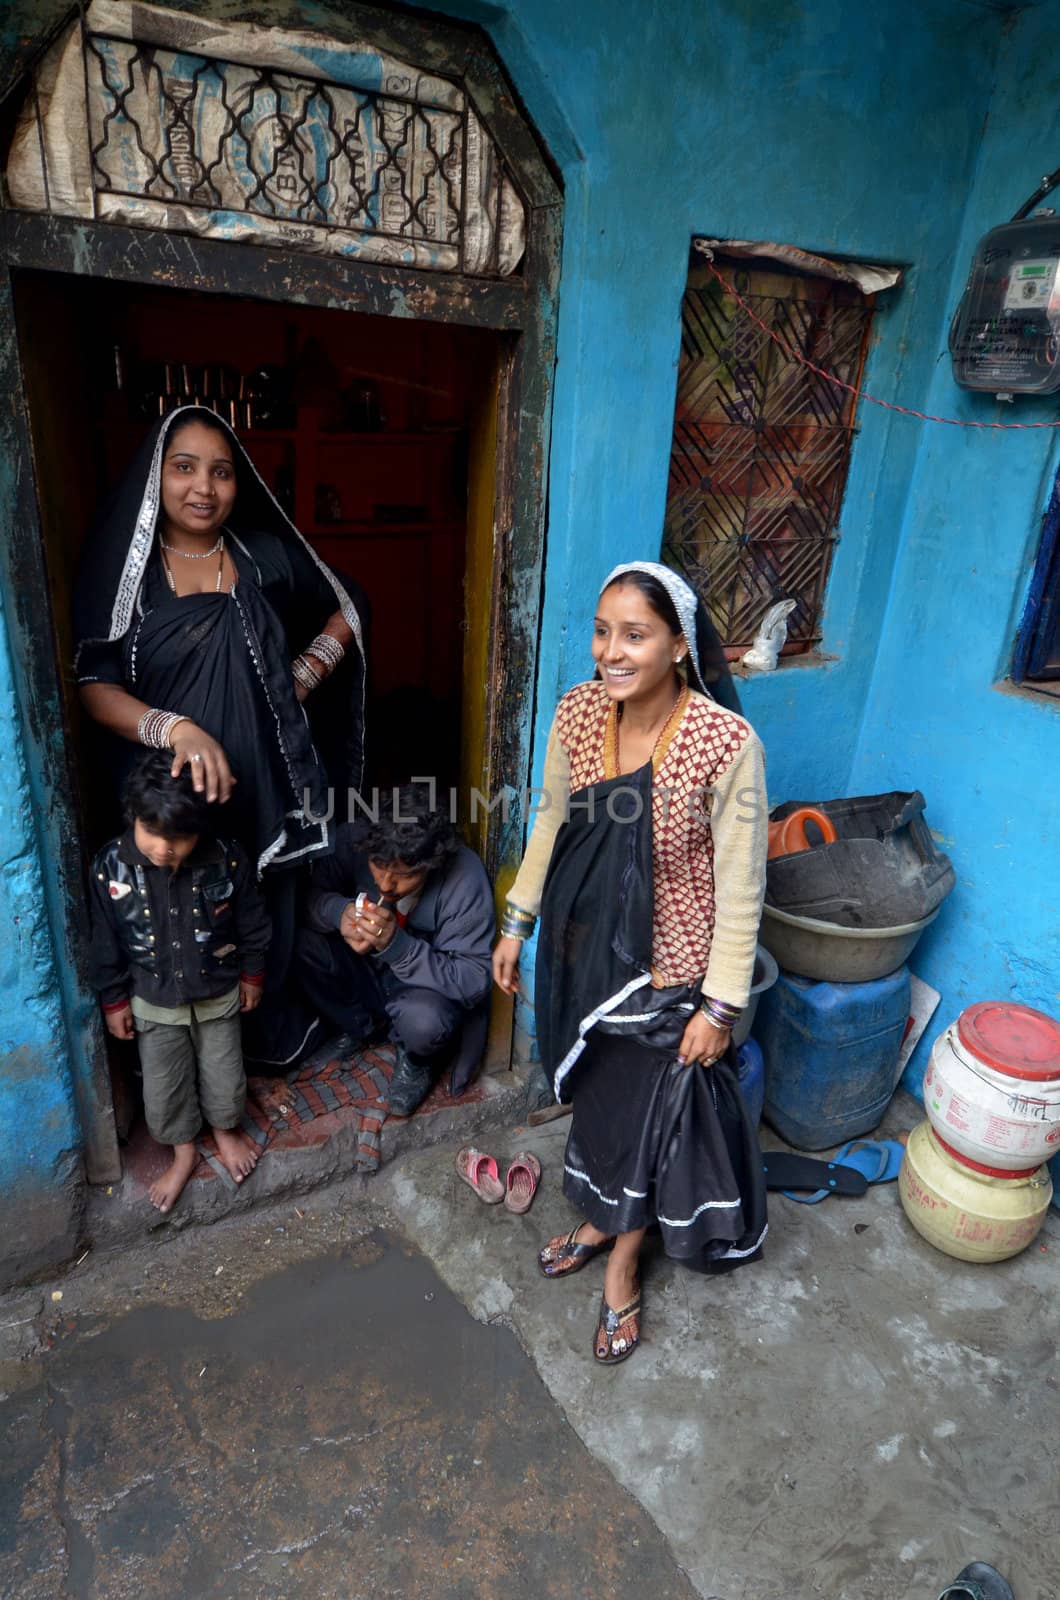 New Delhi,India-February 4, 2013:
two  women speak in the courtyard of his house in the slum in New Delhi in February 4,2013 . In India dramatically increases the number of poor people living in slums